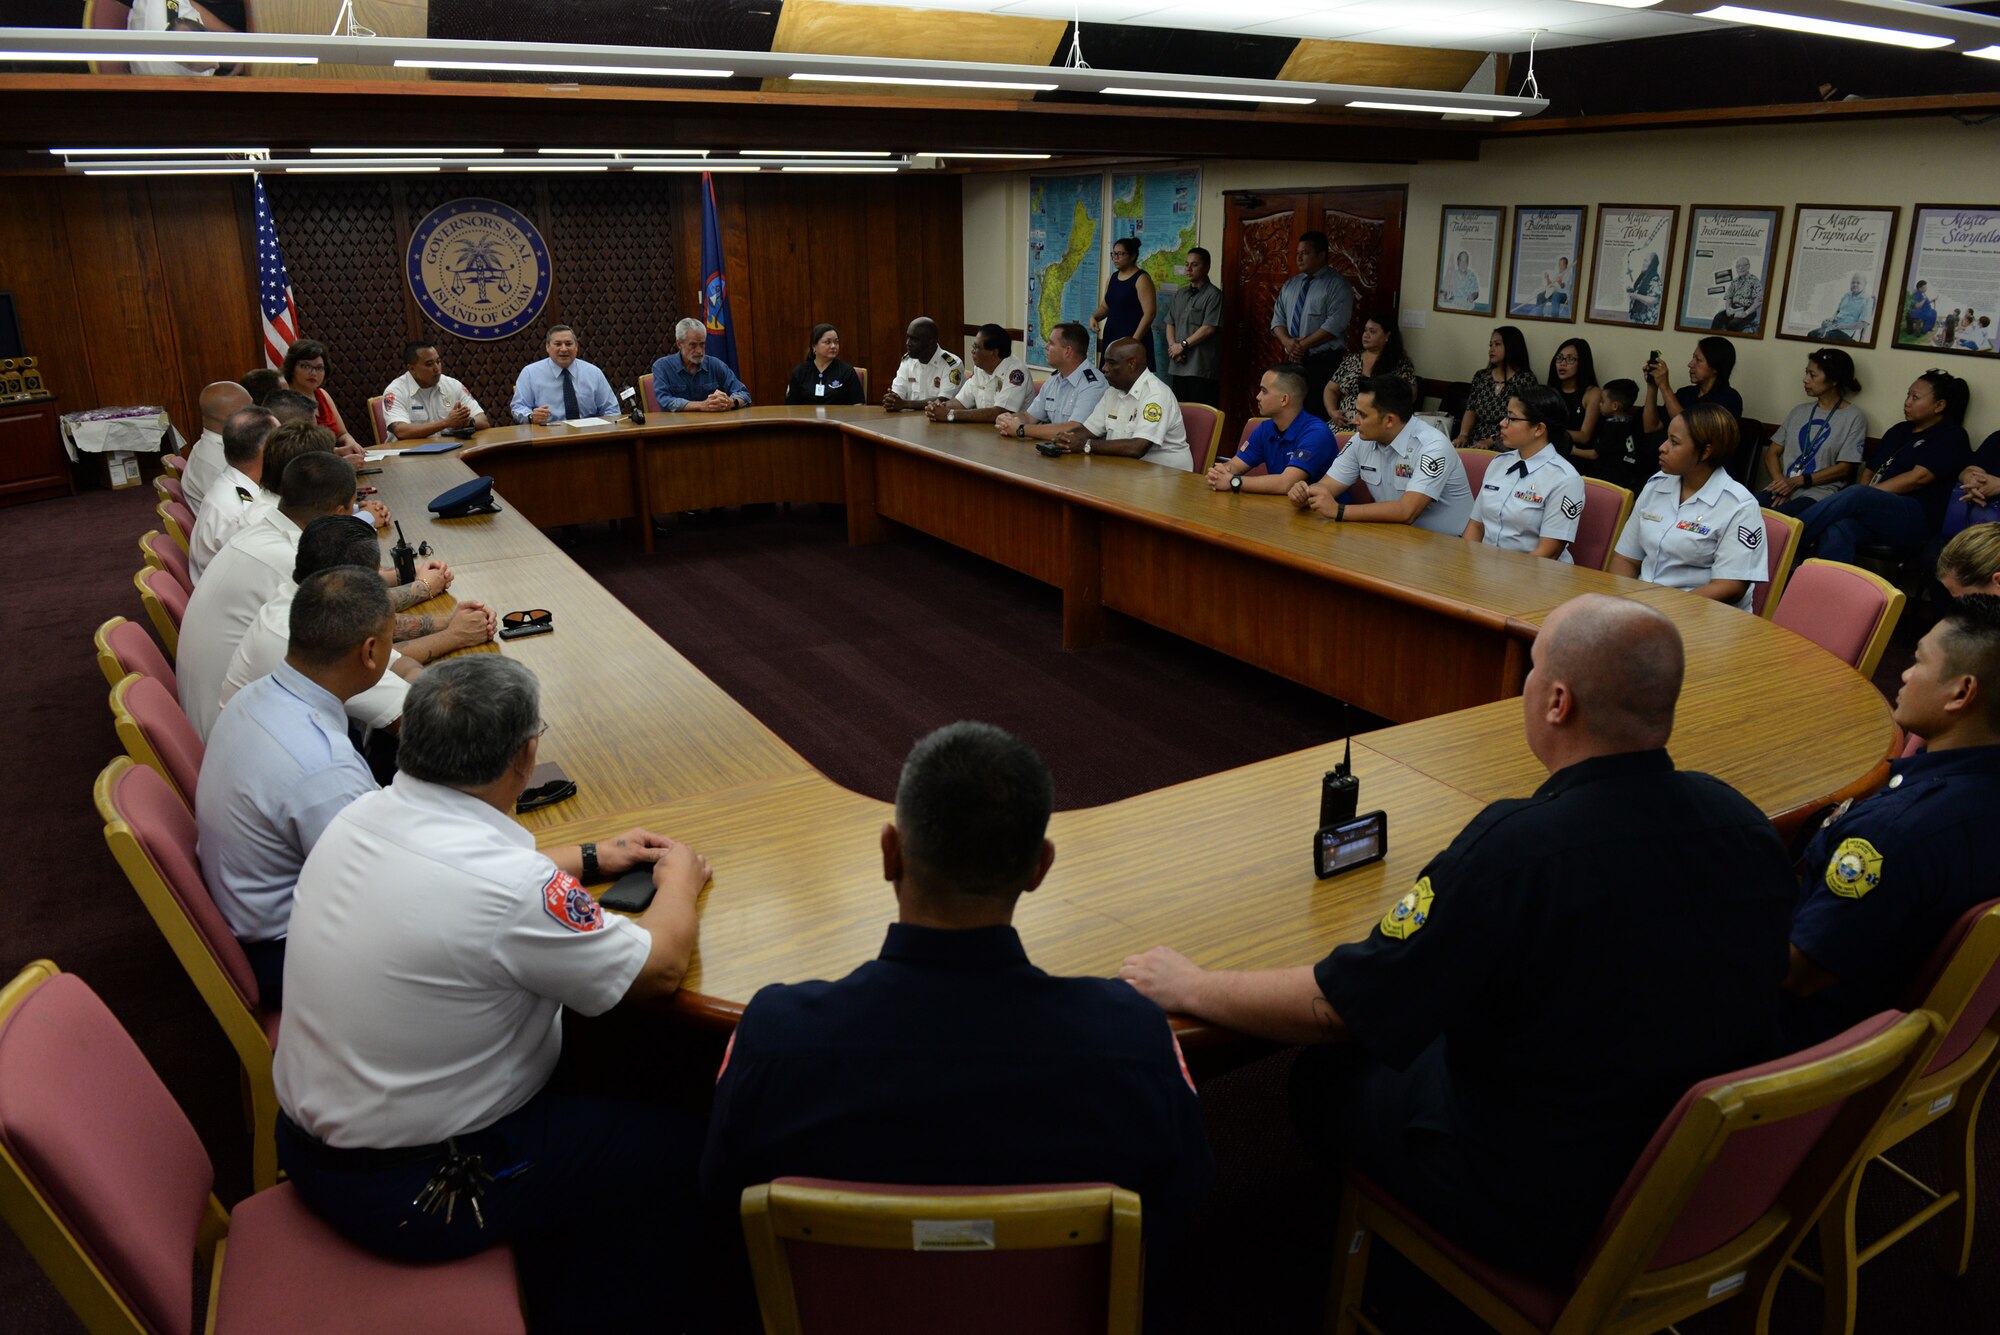 Emergency responders attend a proclamation signing May 16, 2016, at Adelup, Guam. Four Airmen from the 36th Medical Group and 36th Civil Engineer Squadron fire and emergencies services flight received awards in multiple categories including Emergency Medical Technician of the Year and Paramedic of the Year. (U.S. Air Force photo by Airman 1st Class Jacob Skovo)